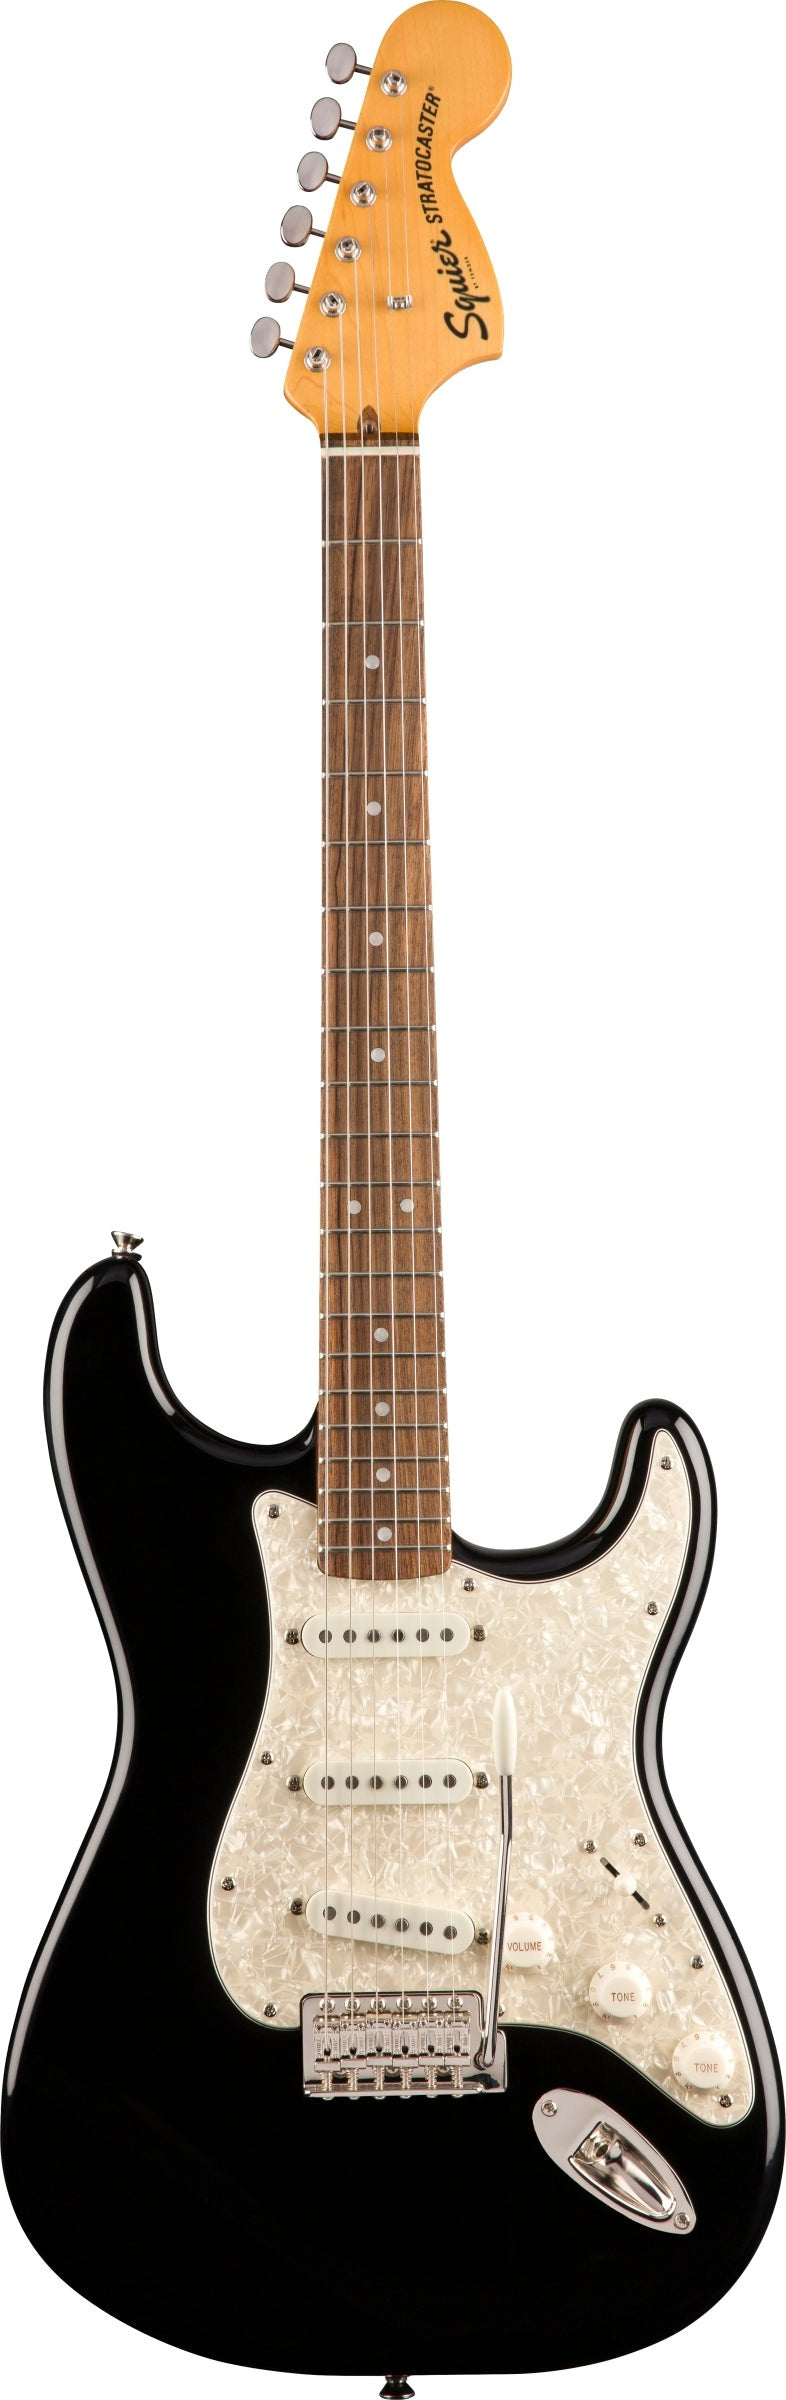 Squier Classic Vibe '70s Stratocaster Electric Guitar Black